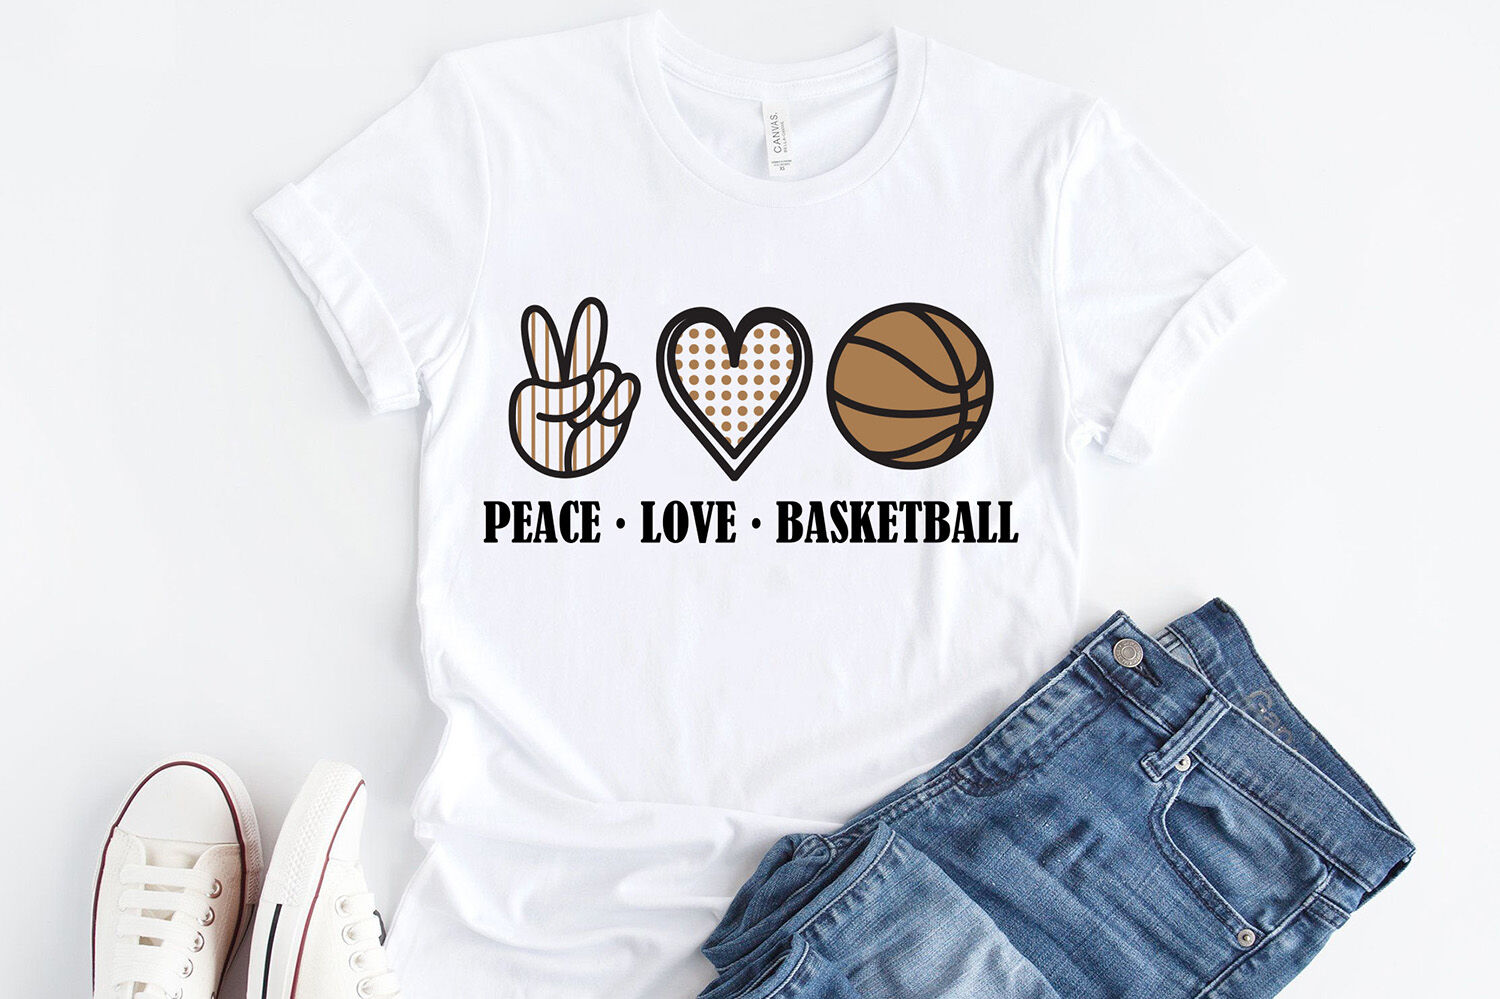 Download Love Basketball Svg Check Out Our Basketball Love Svg Selection For The Very Best In Unique Or Custom Handmade Pieces From Our Digital Shops PSD Mockup Templates